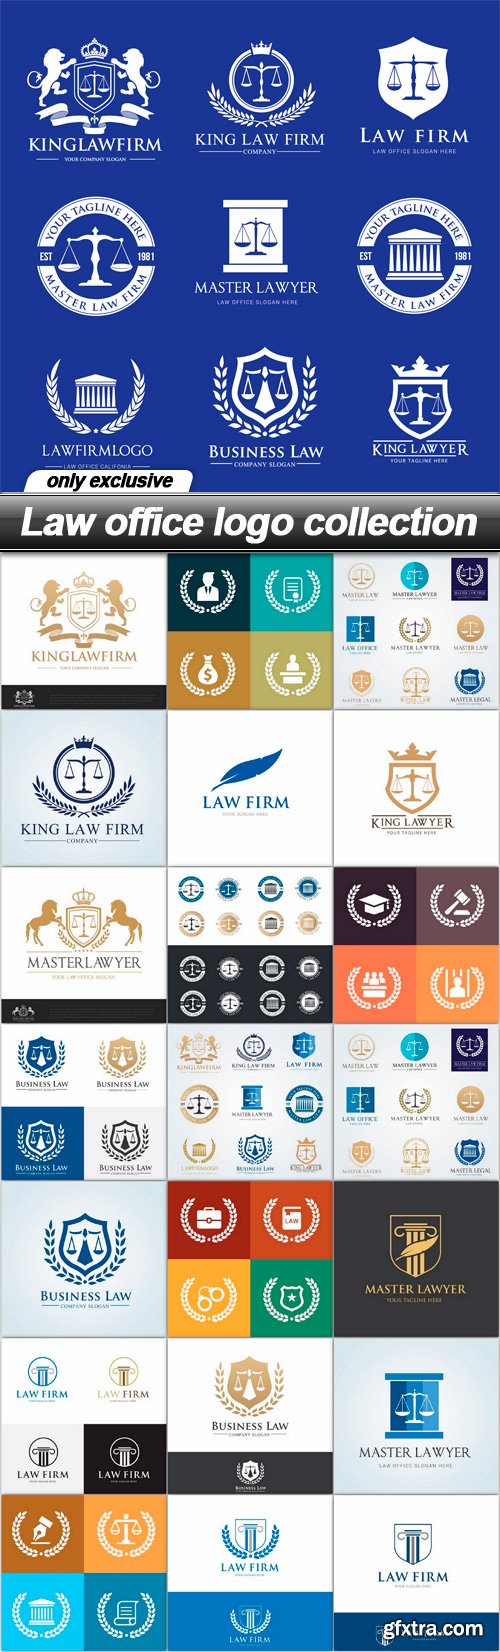 Law office logo collection - 42 EPS